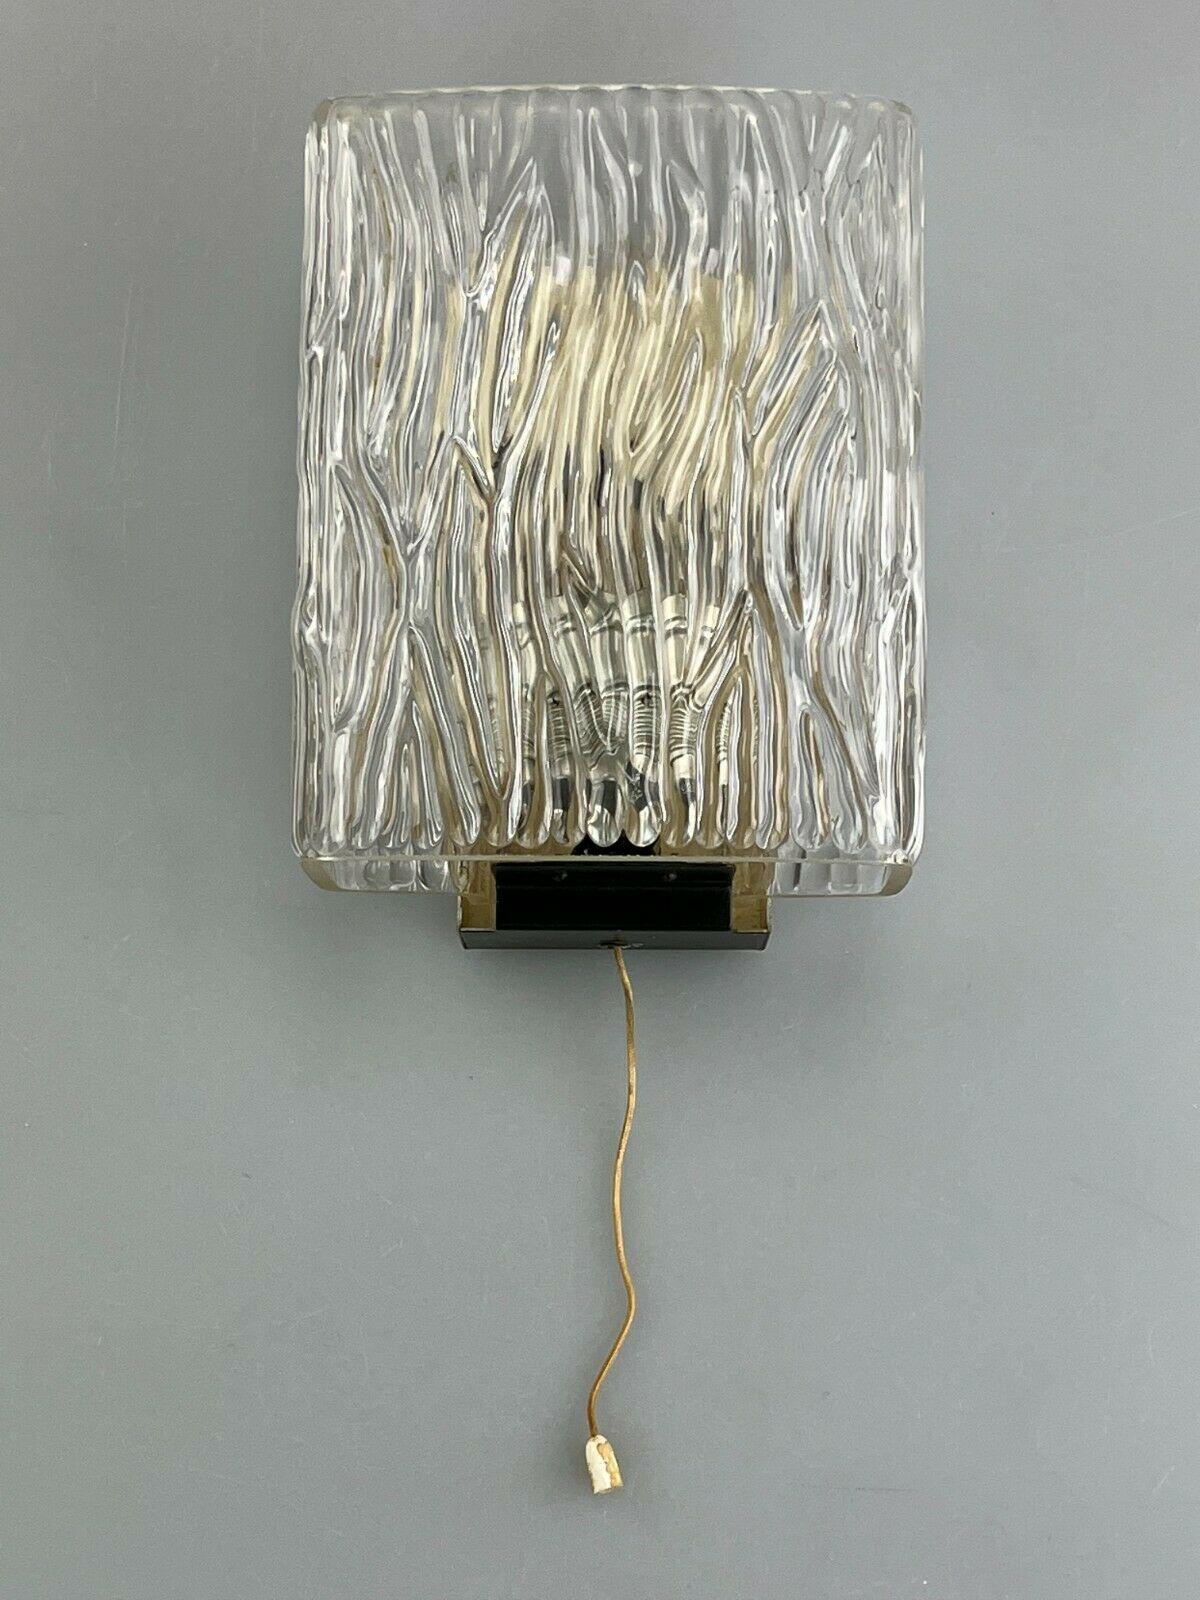 60s 70s Lamp light wall lamp wall sconce glass space age design 60s 70s

Object: wall lamp

Manufacturer:

Condition: good

Age: around 1960-1970

Dimensions:

14.5cm x 11cm x 19cm

Other notes:

The pictures serve as part of the